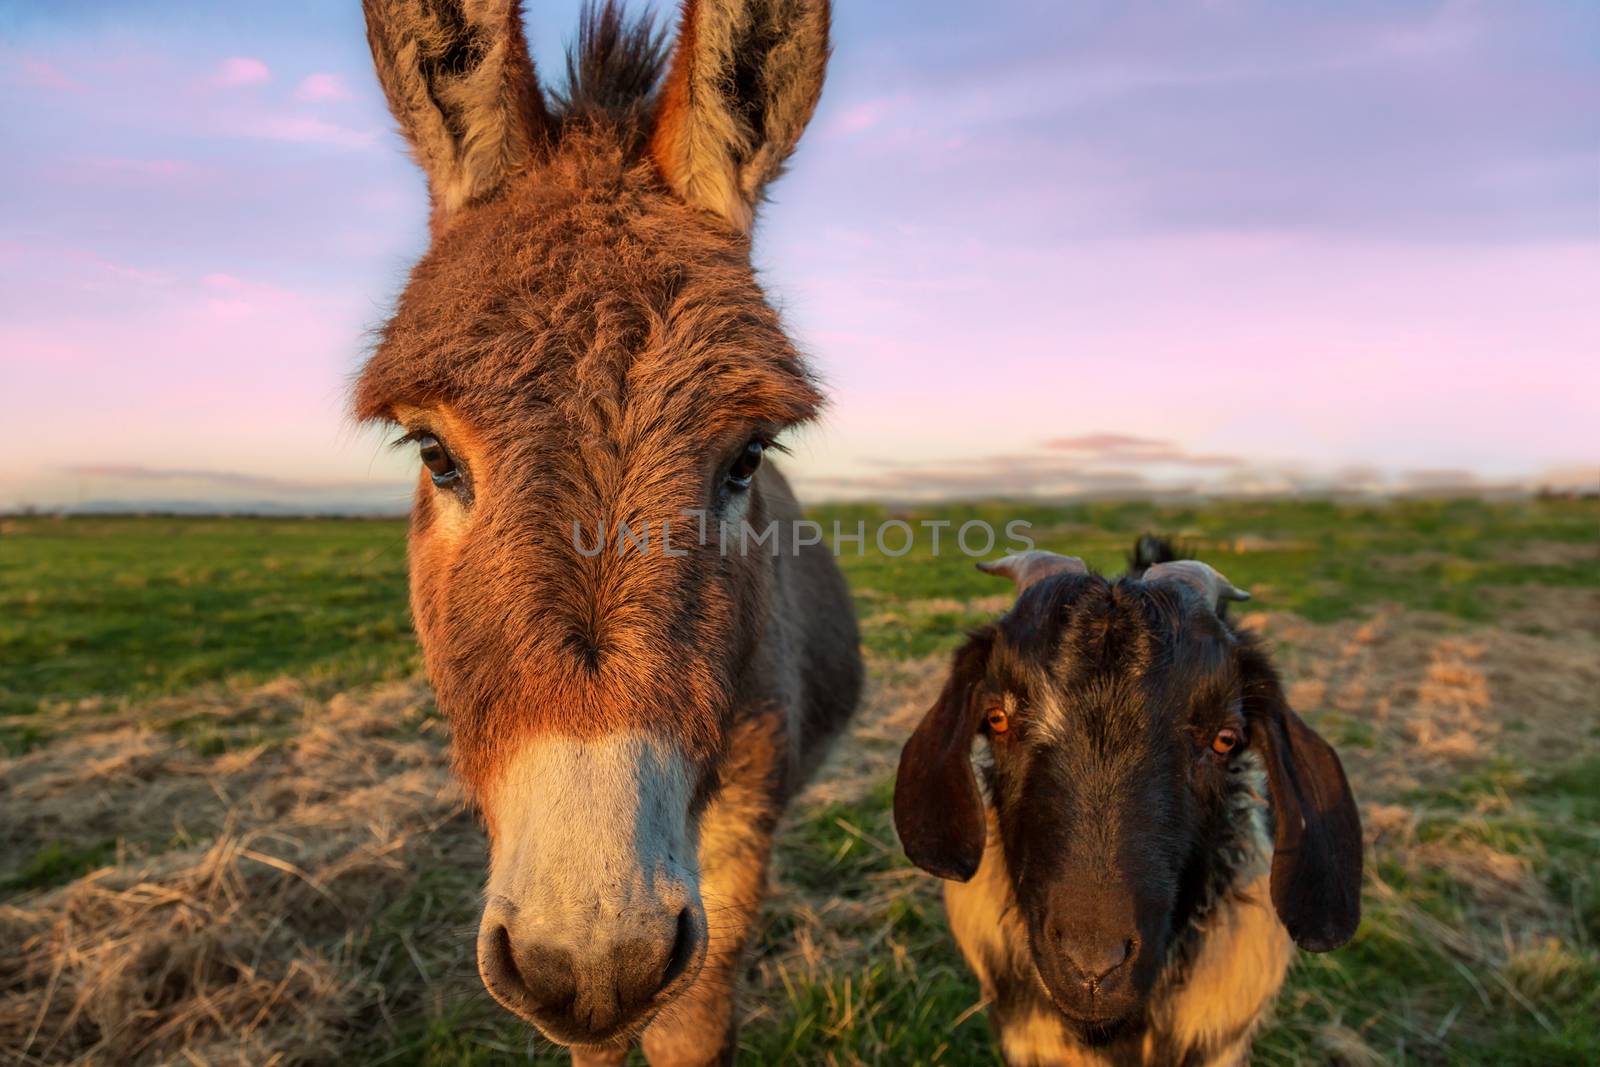 A Color Portrait of a Dinkey and Goat at Sunset, California, USA by backyard_photography